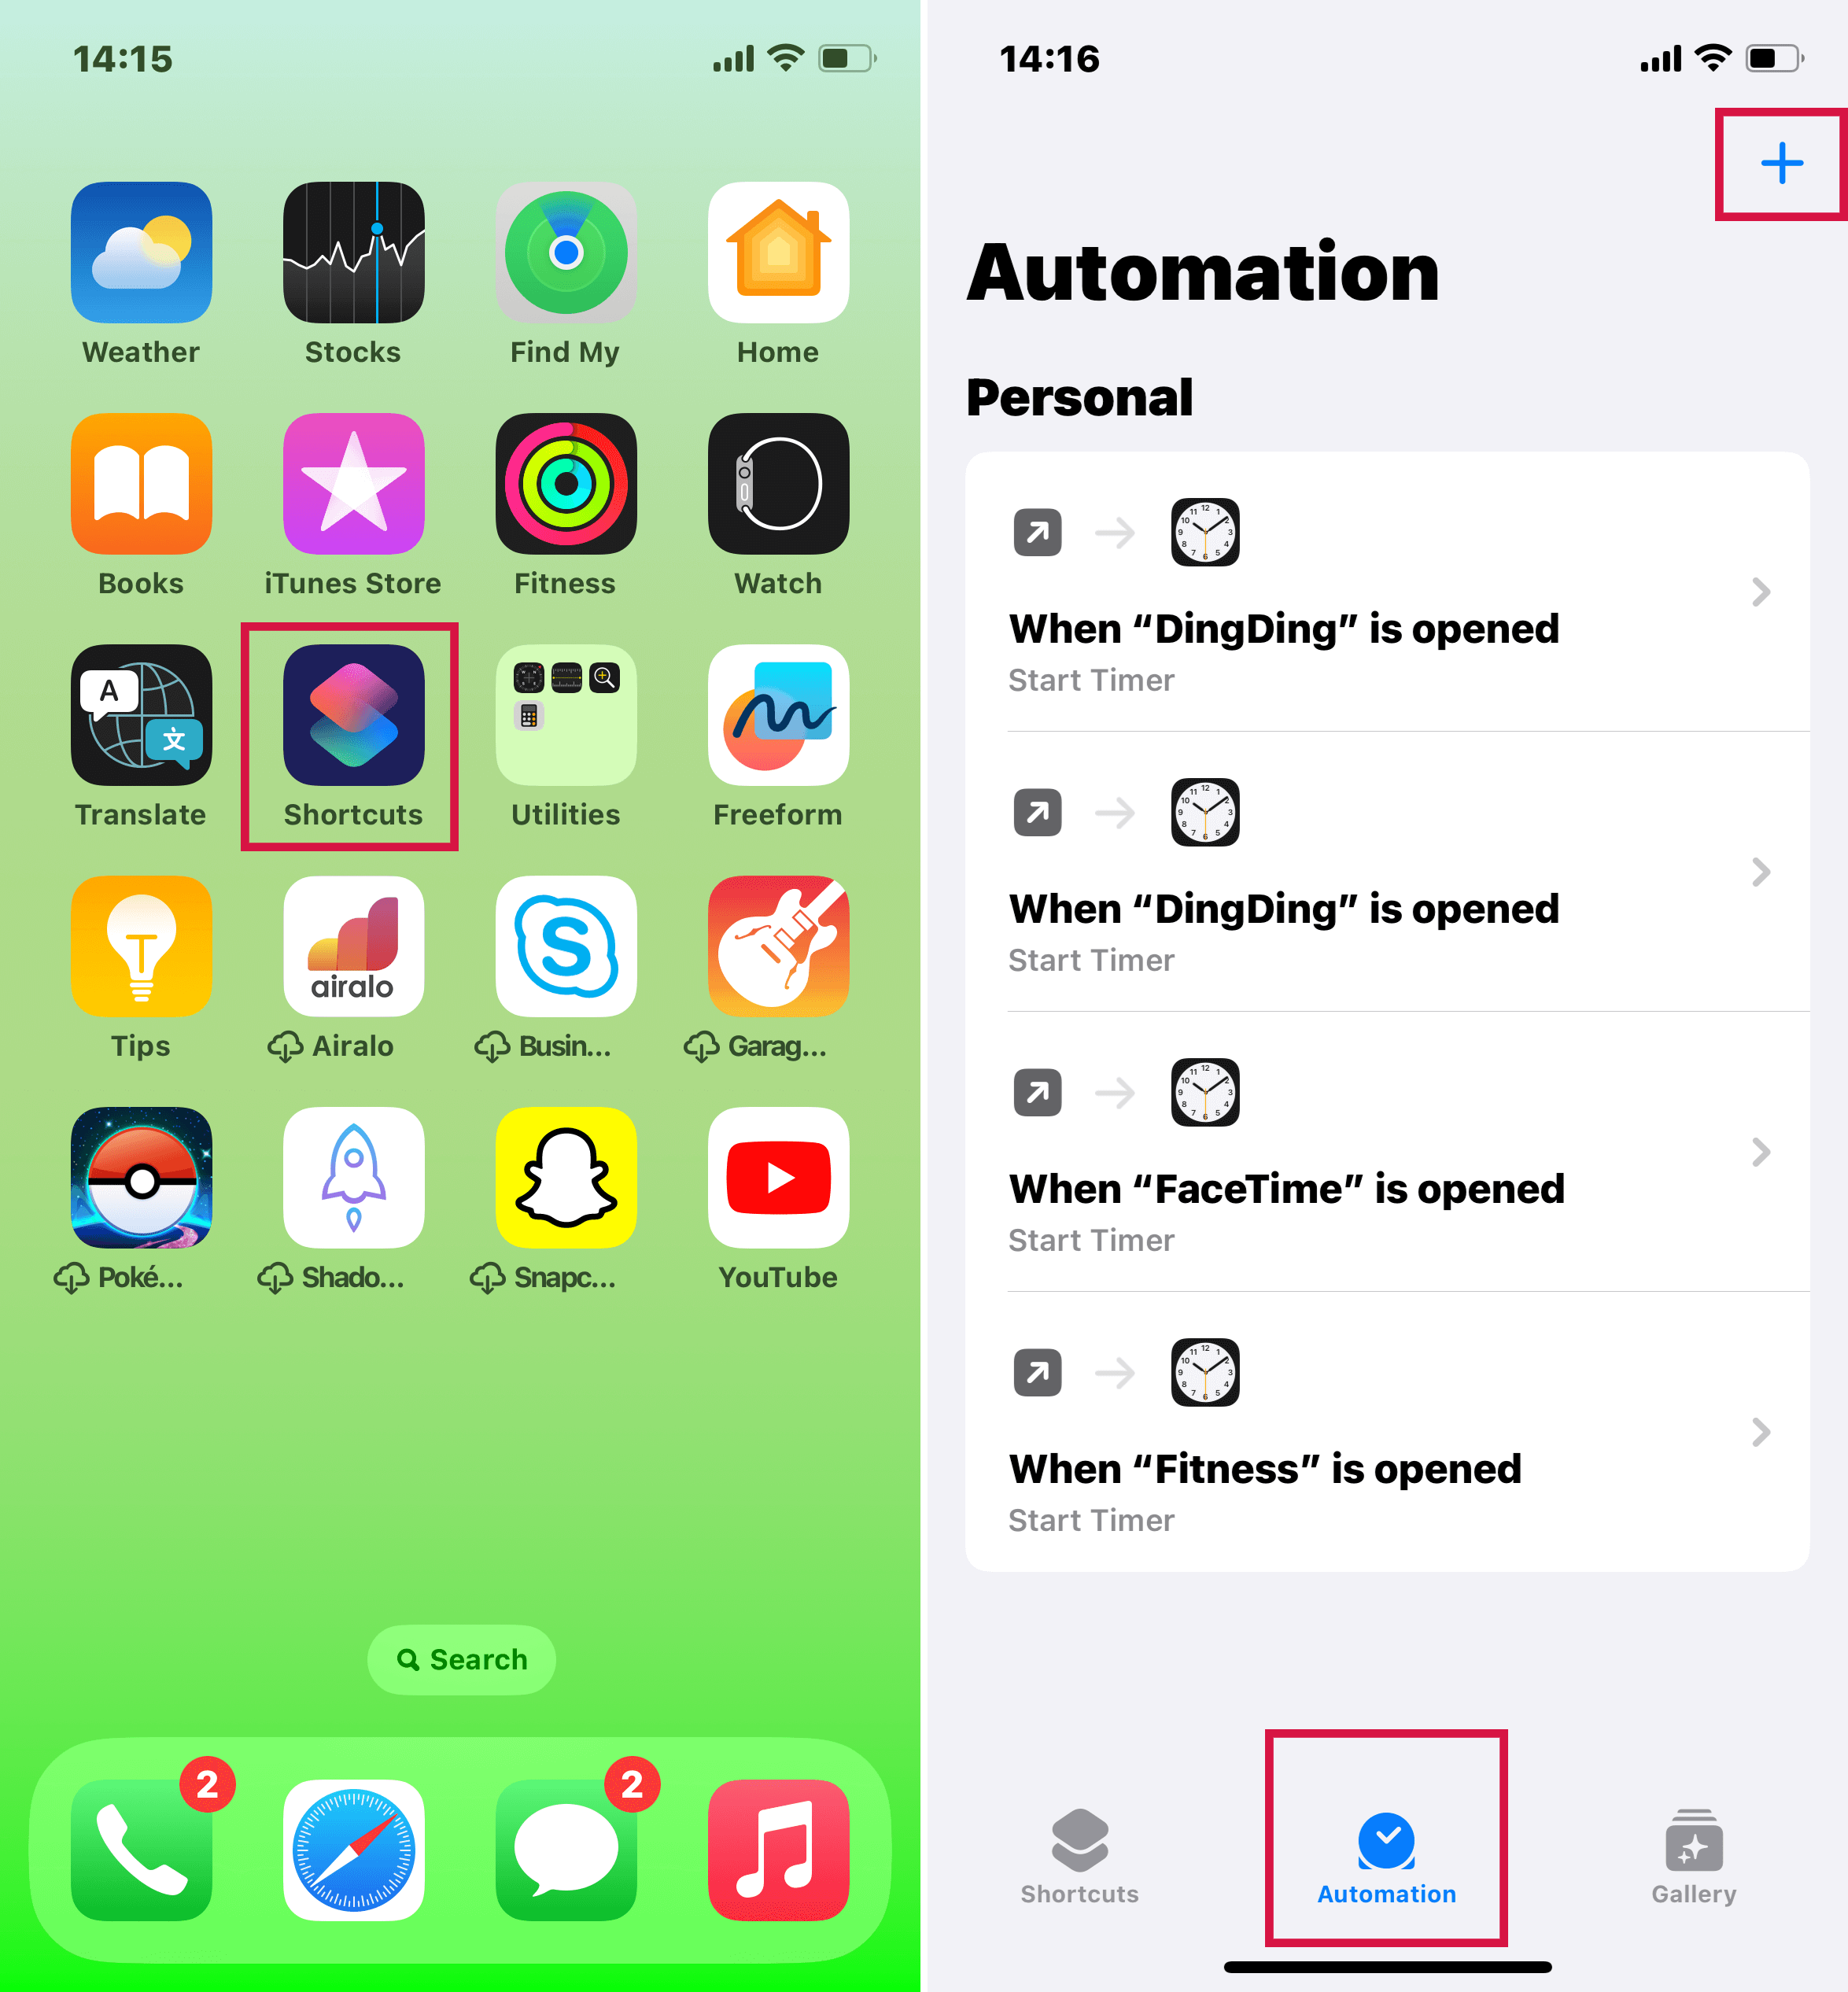 Launch the Shortcuts App and Access the Automation Tab